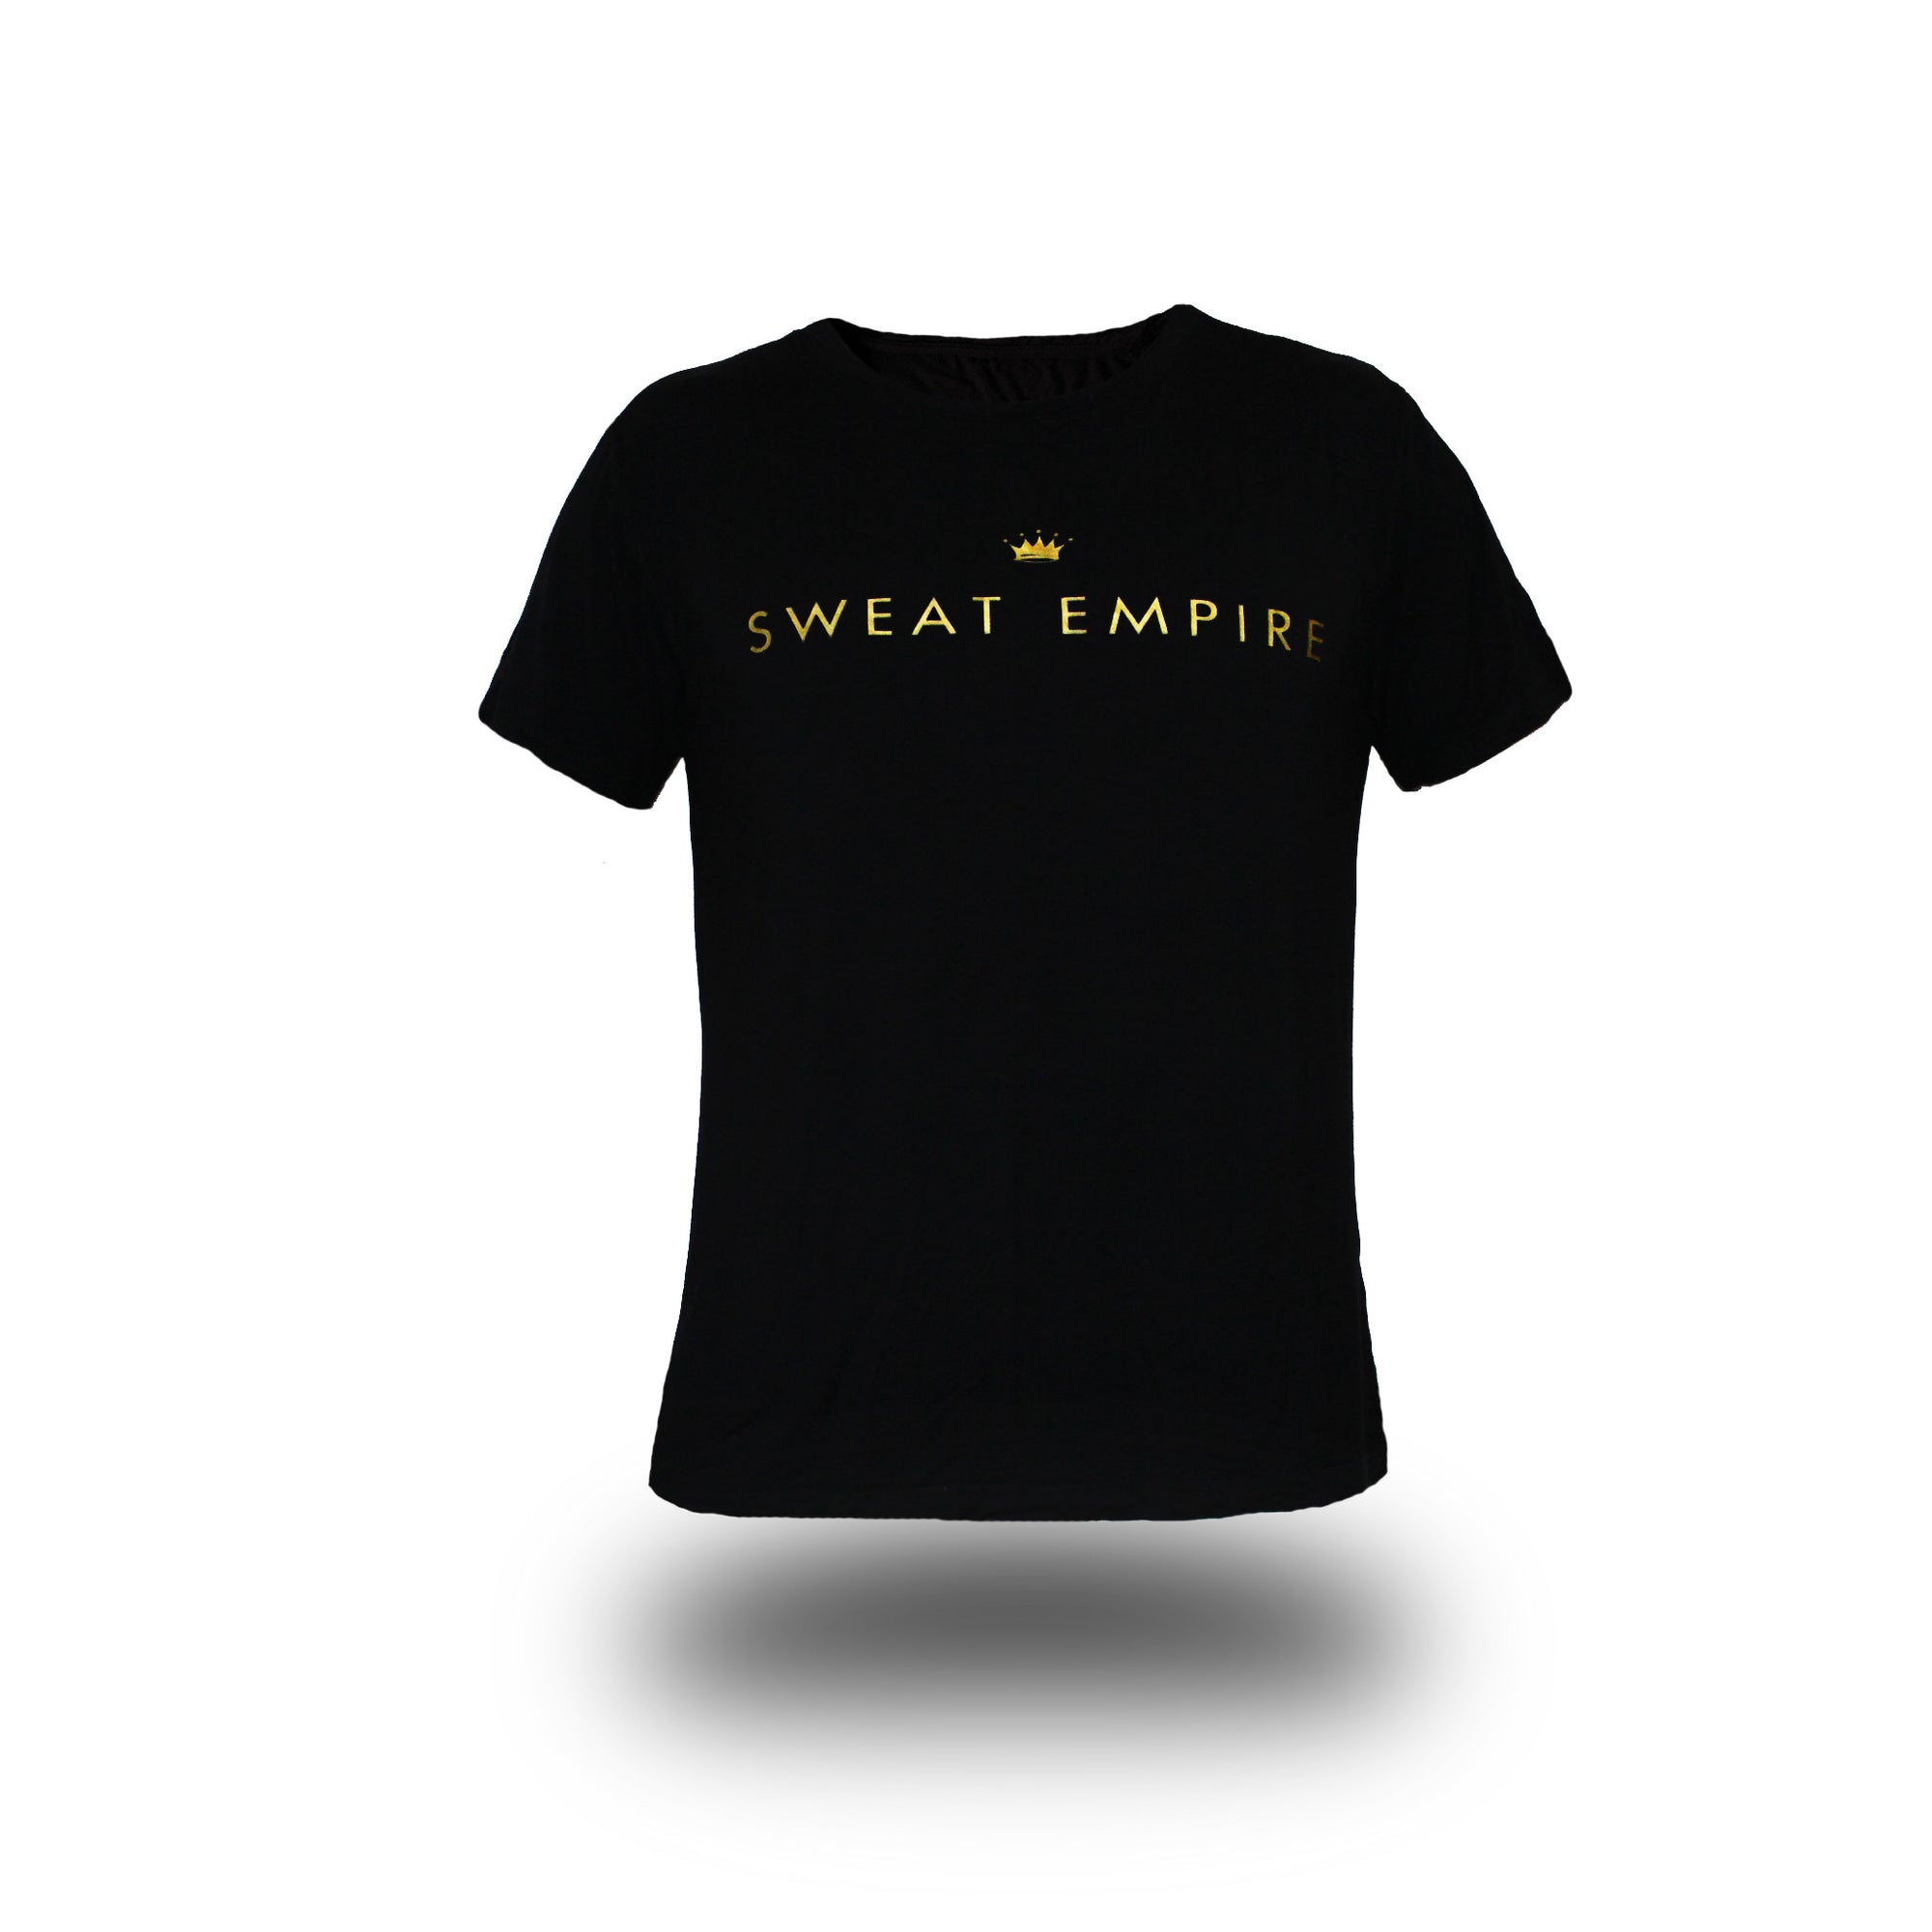 Mens limited edition tee black with gold print front